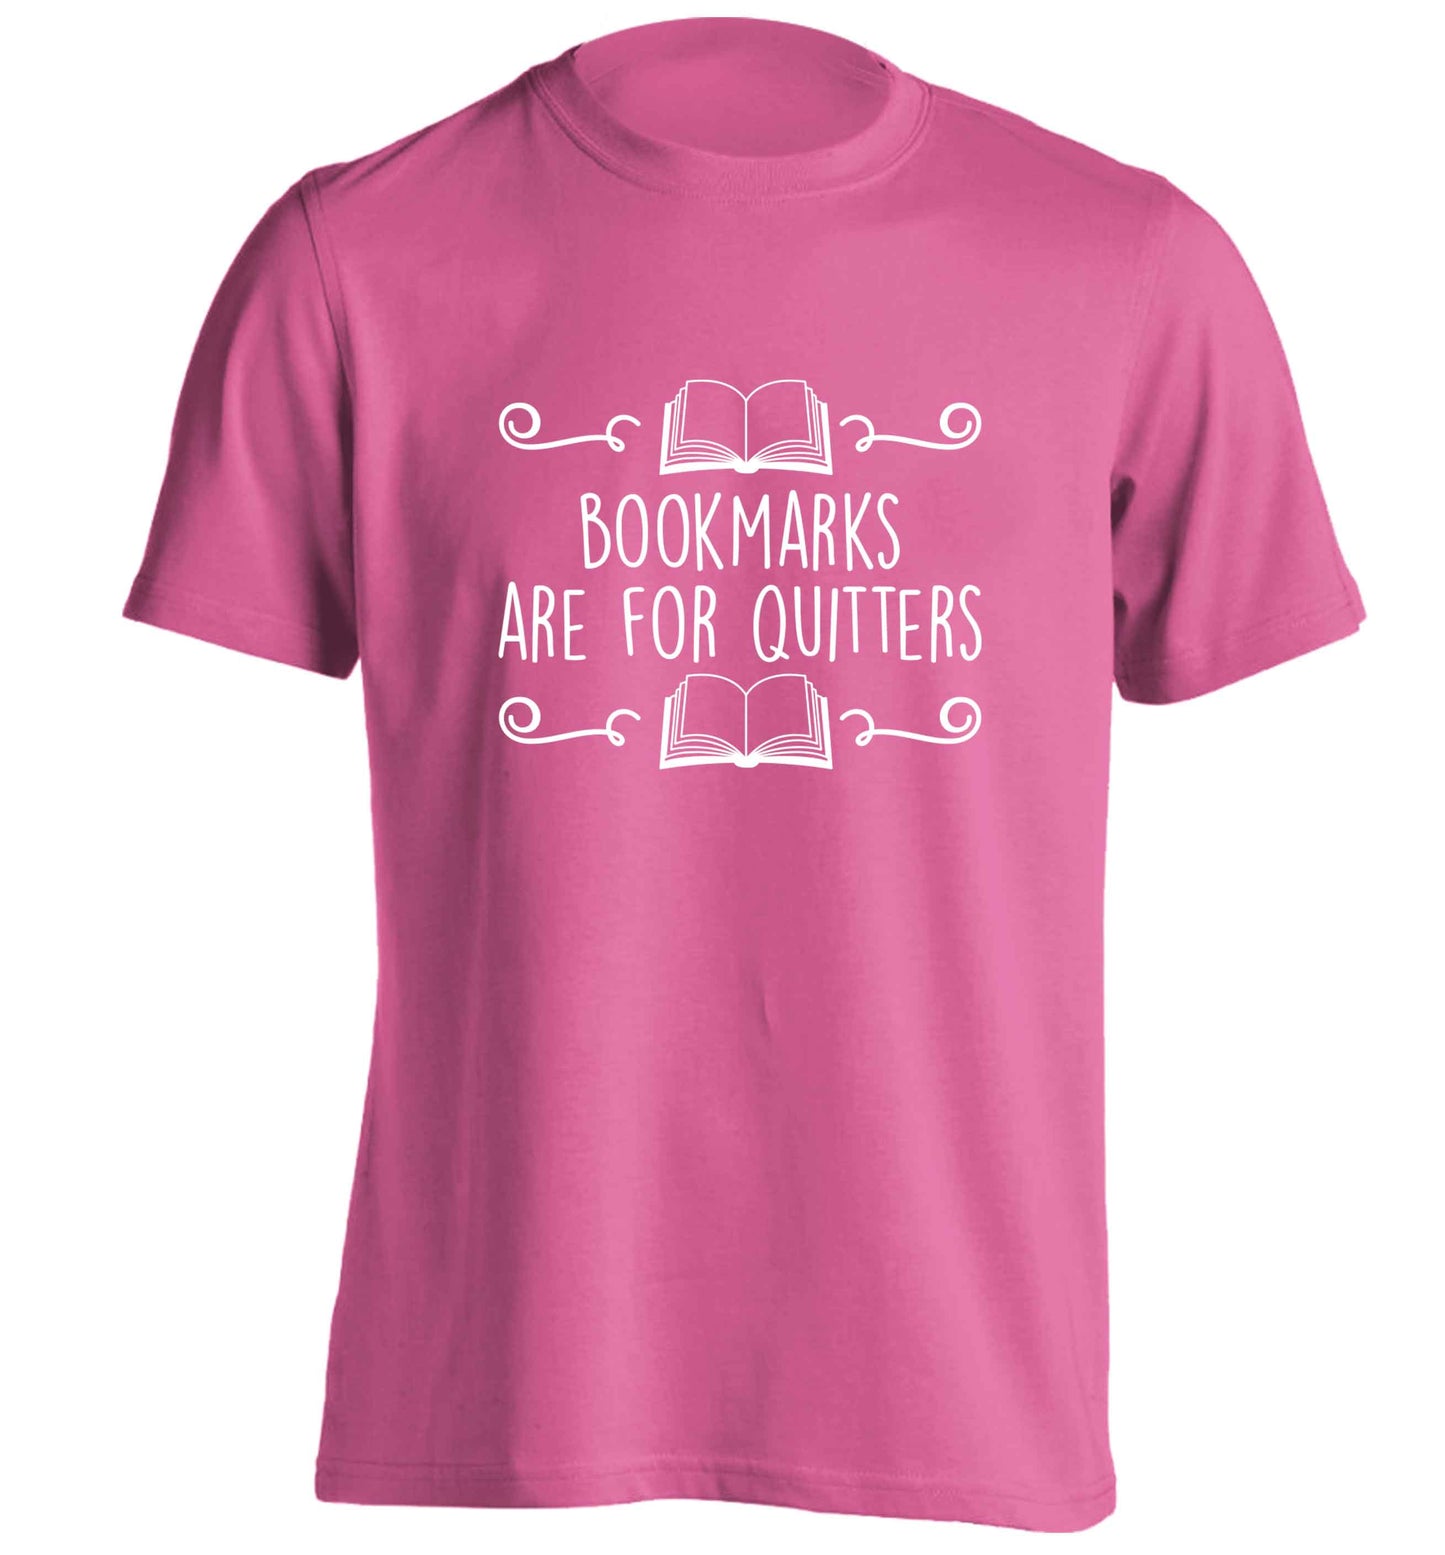 Bookmarks are for quitters adults unisex pink Tshirt 2XL